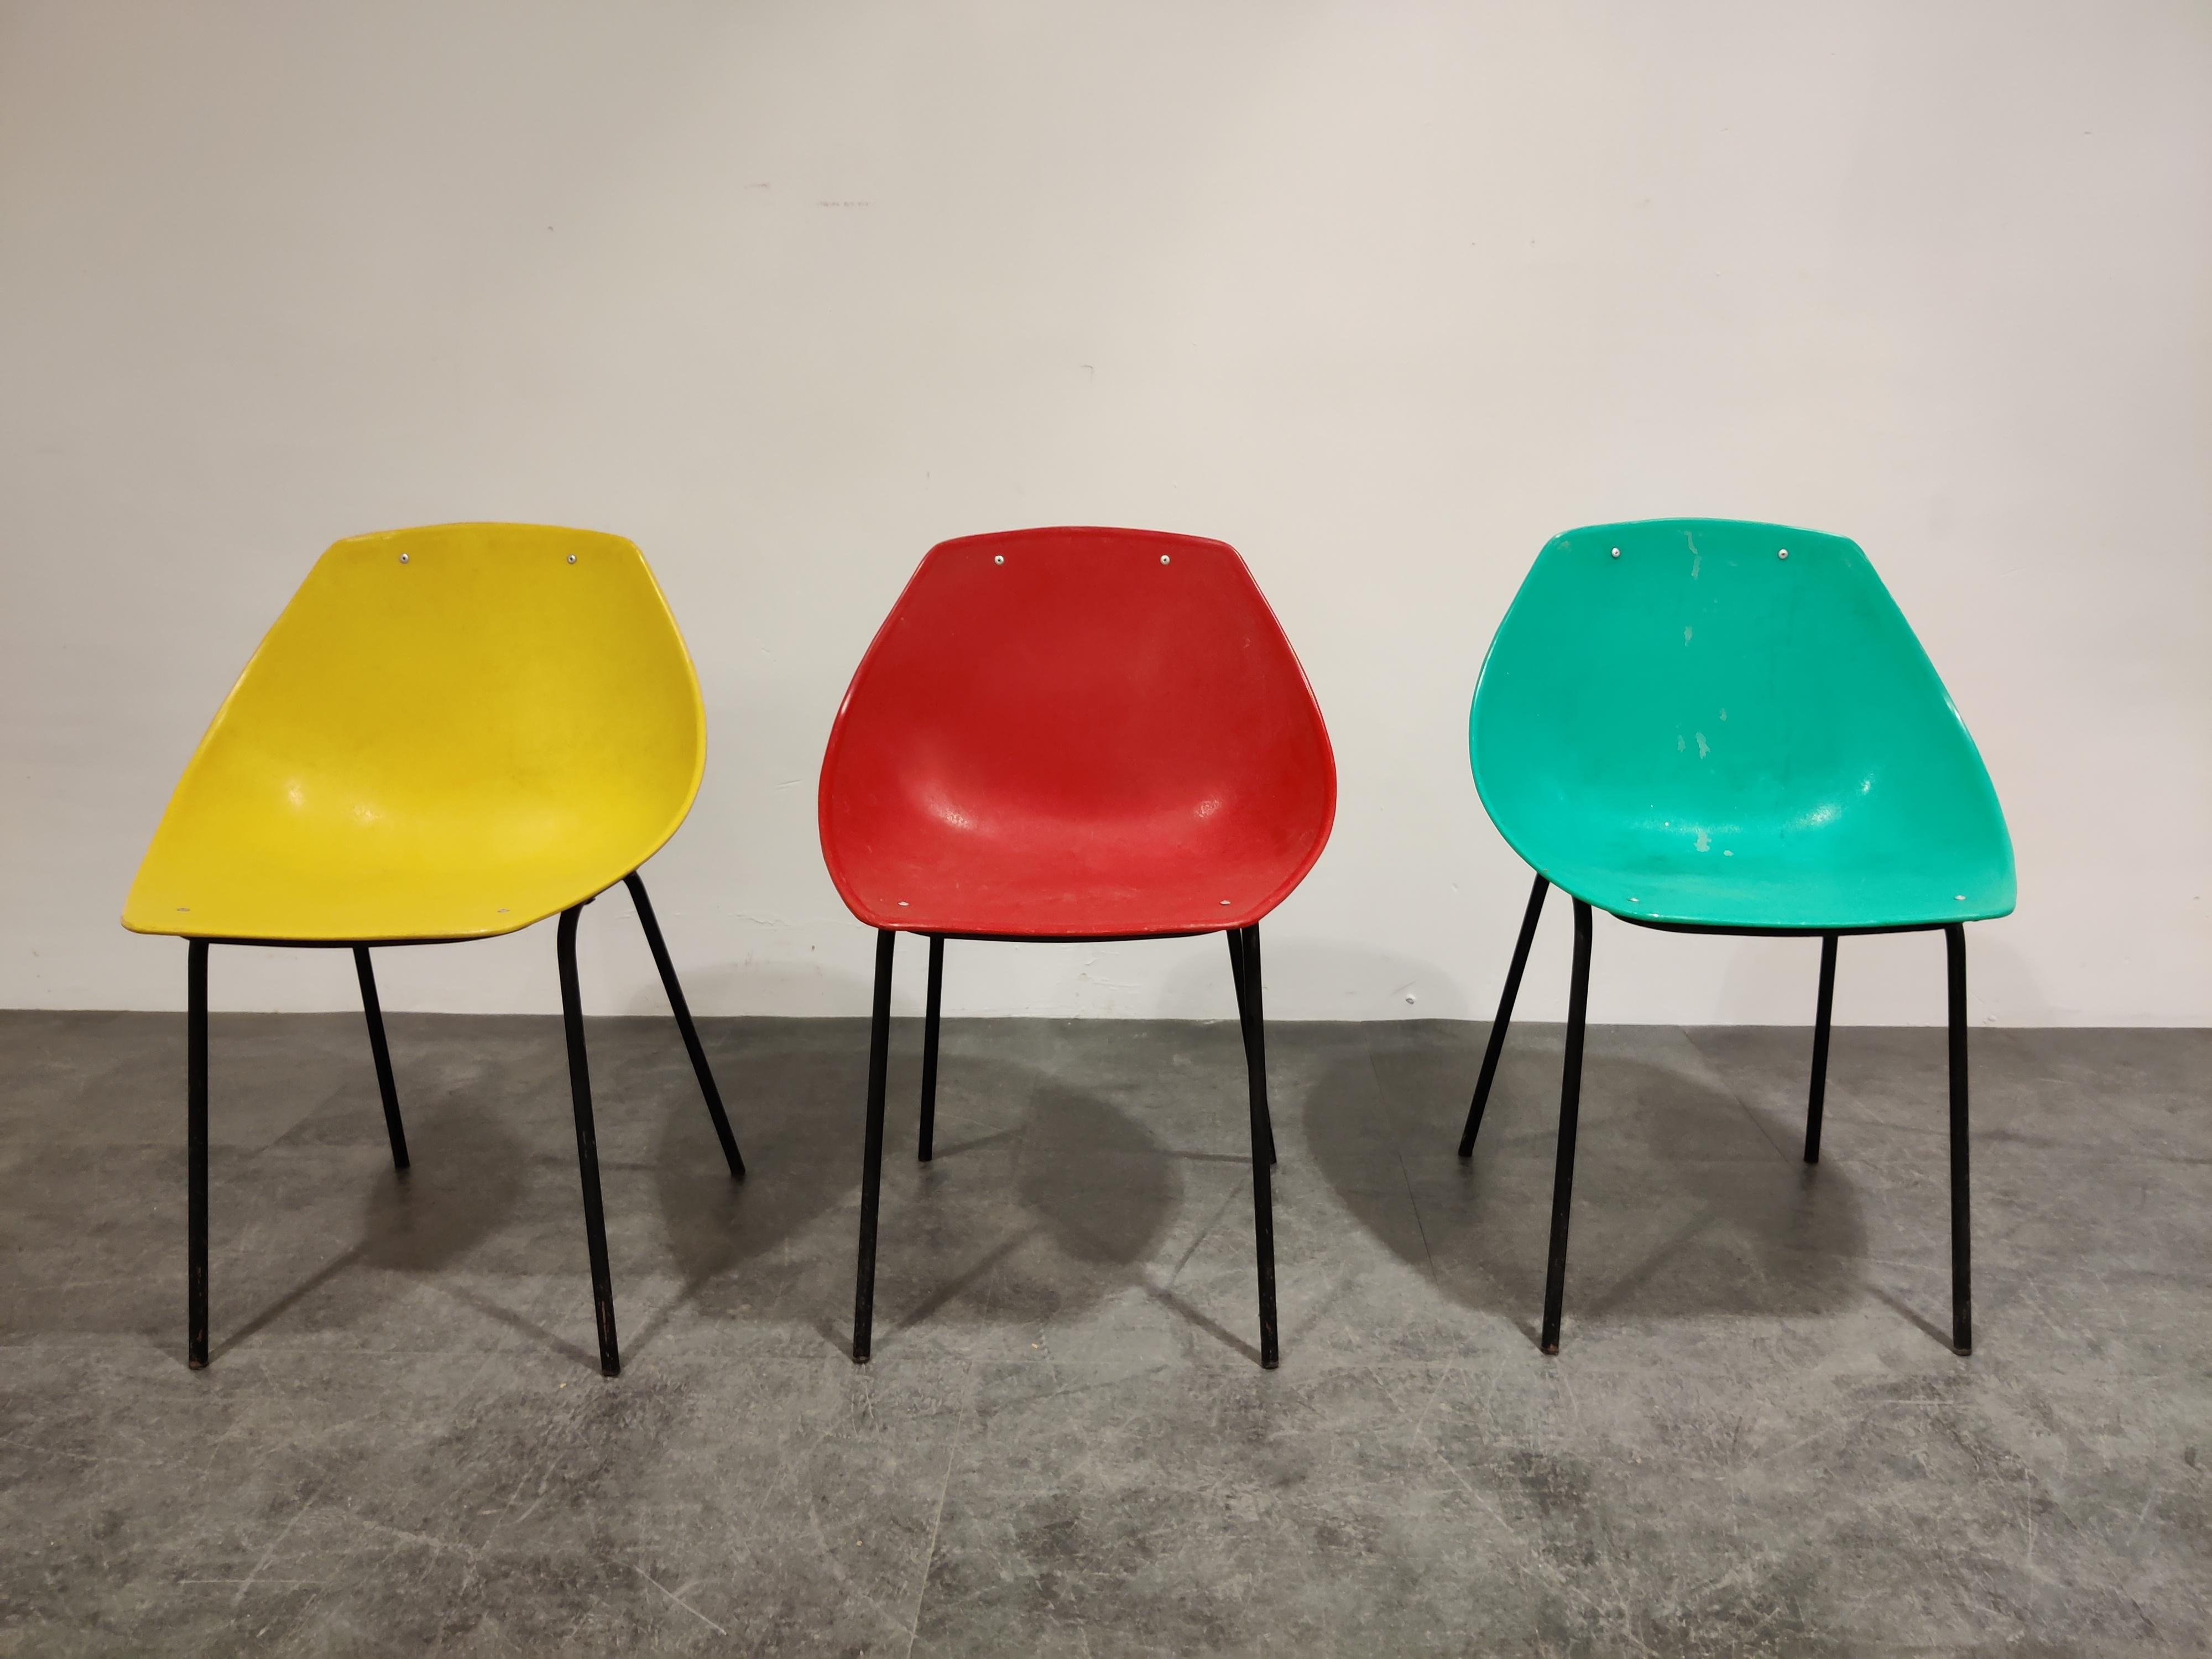 Set of 3 vintage coquillage chairs by French designer Pierre Guariche for Meurop.

This colourful set of chairs is made from a plastic shell mounted on an elegant black metal base

The colour of the chairs has been kept very well. The frames